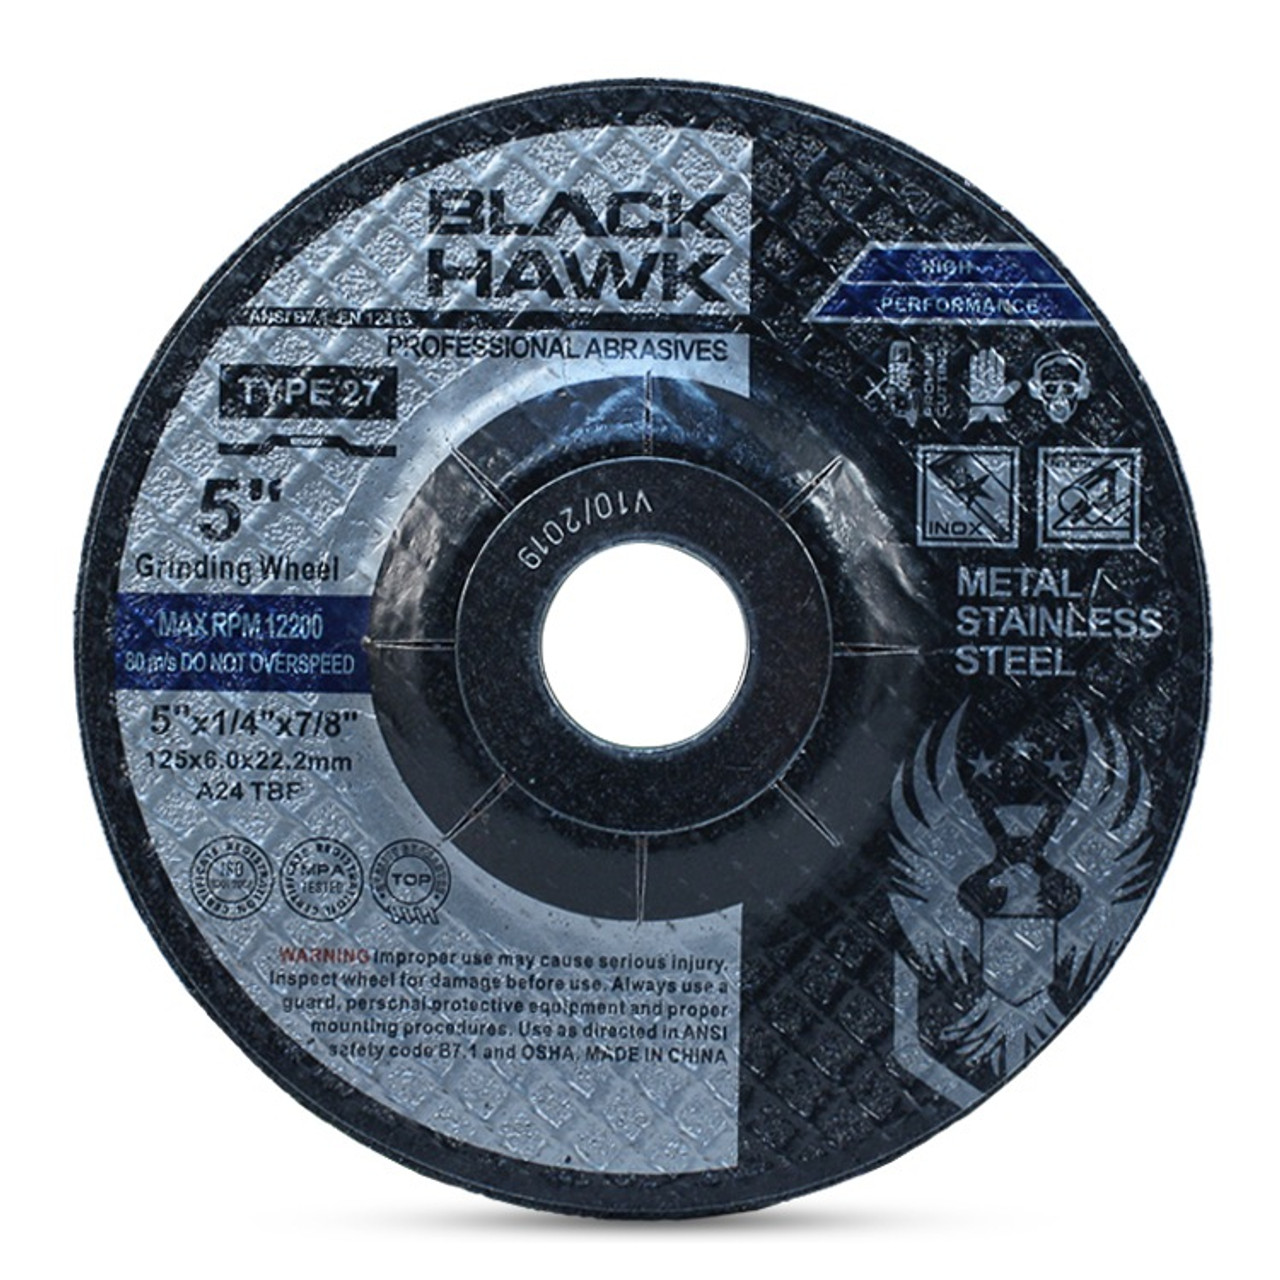 Blue Hawk Fiber Cleaning and Polishing Wheel Accessory at